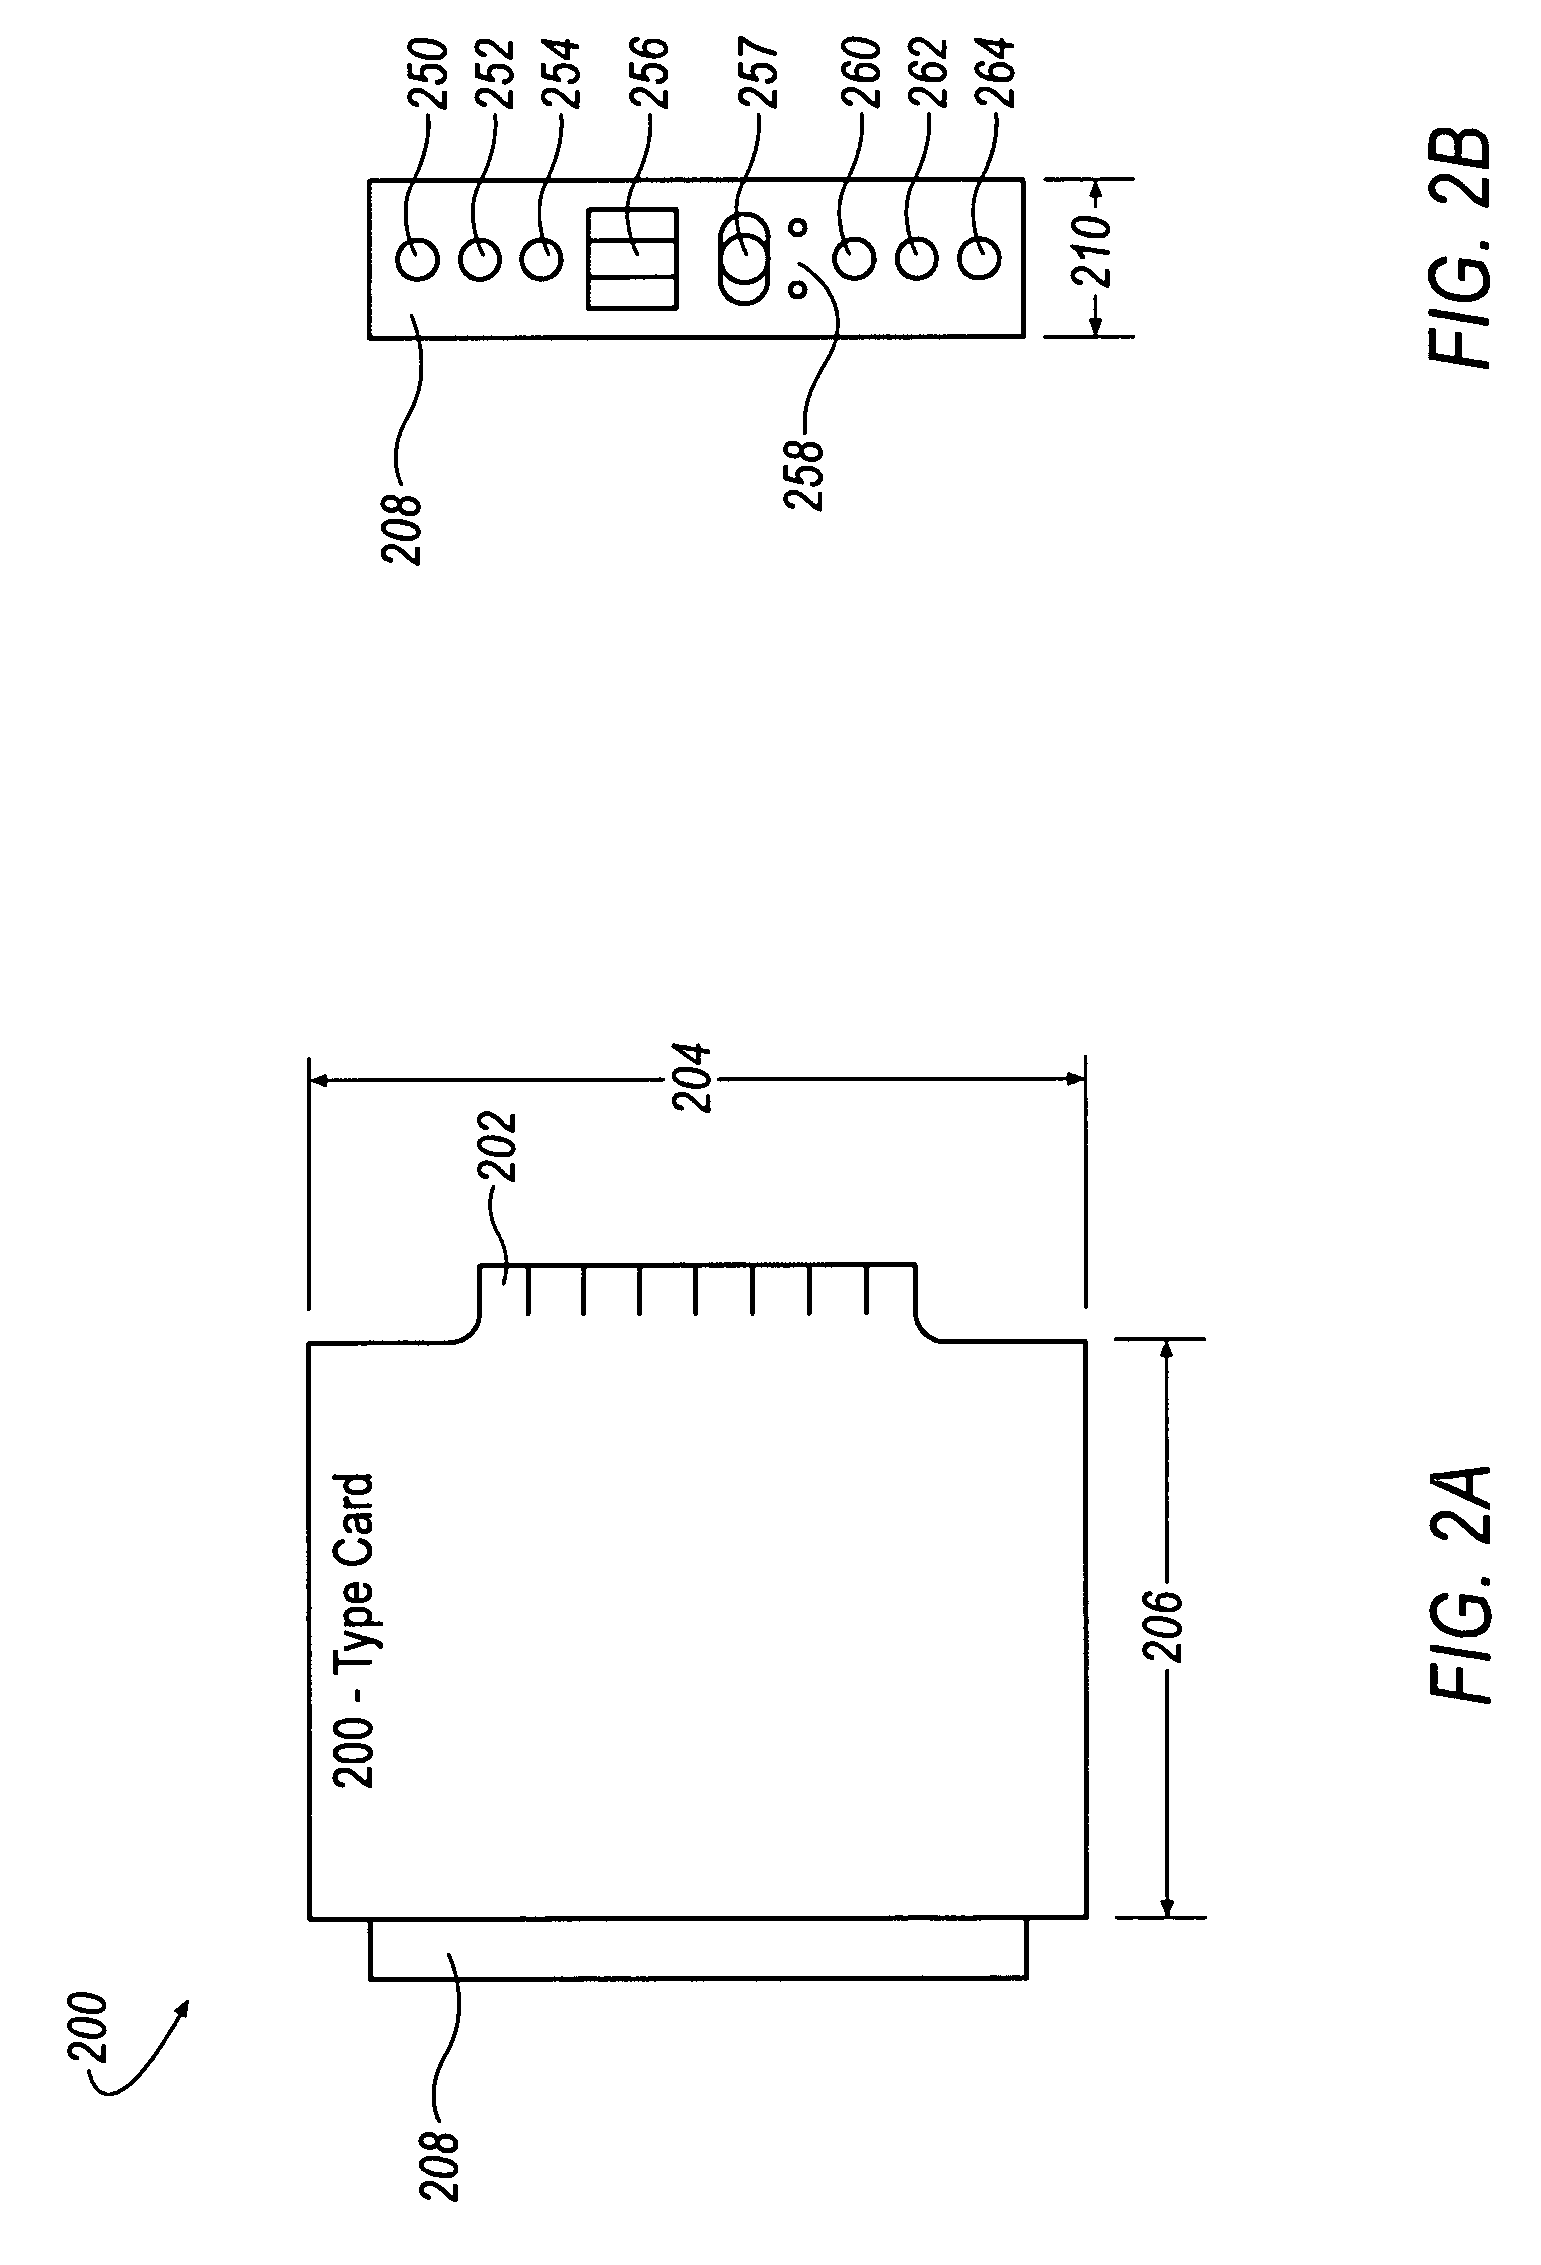 Terminal extension repeater